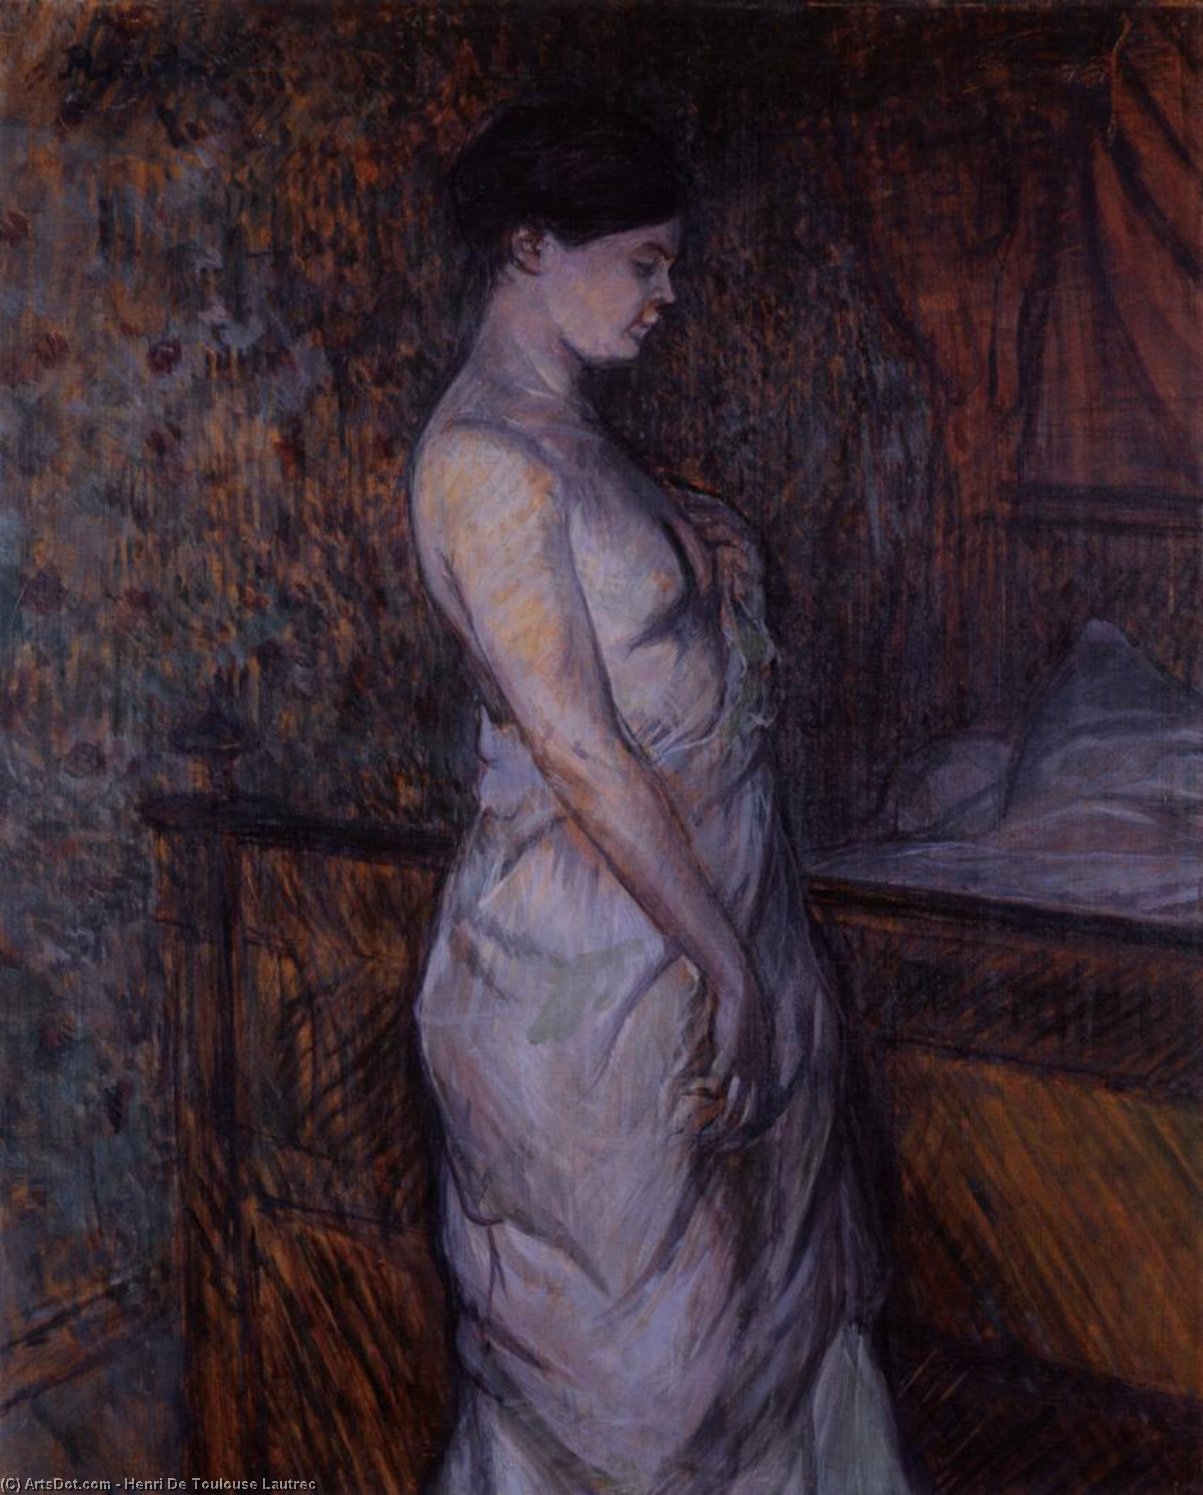 Order Artwork Replica Woman in a Chemise Standing by a Bed (also known as Madame Poupoule), 1899 by Henri De Toulouse Lautrec (1864-1901, France) | ArtsDot.com